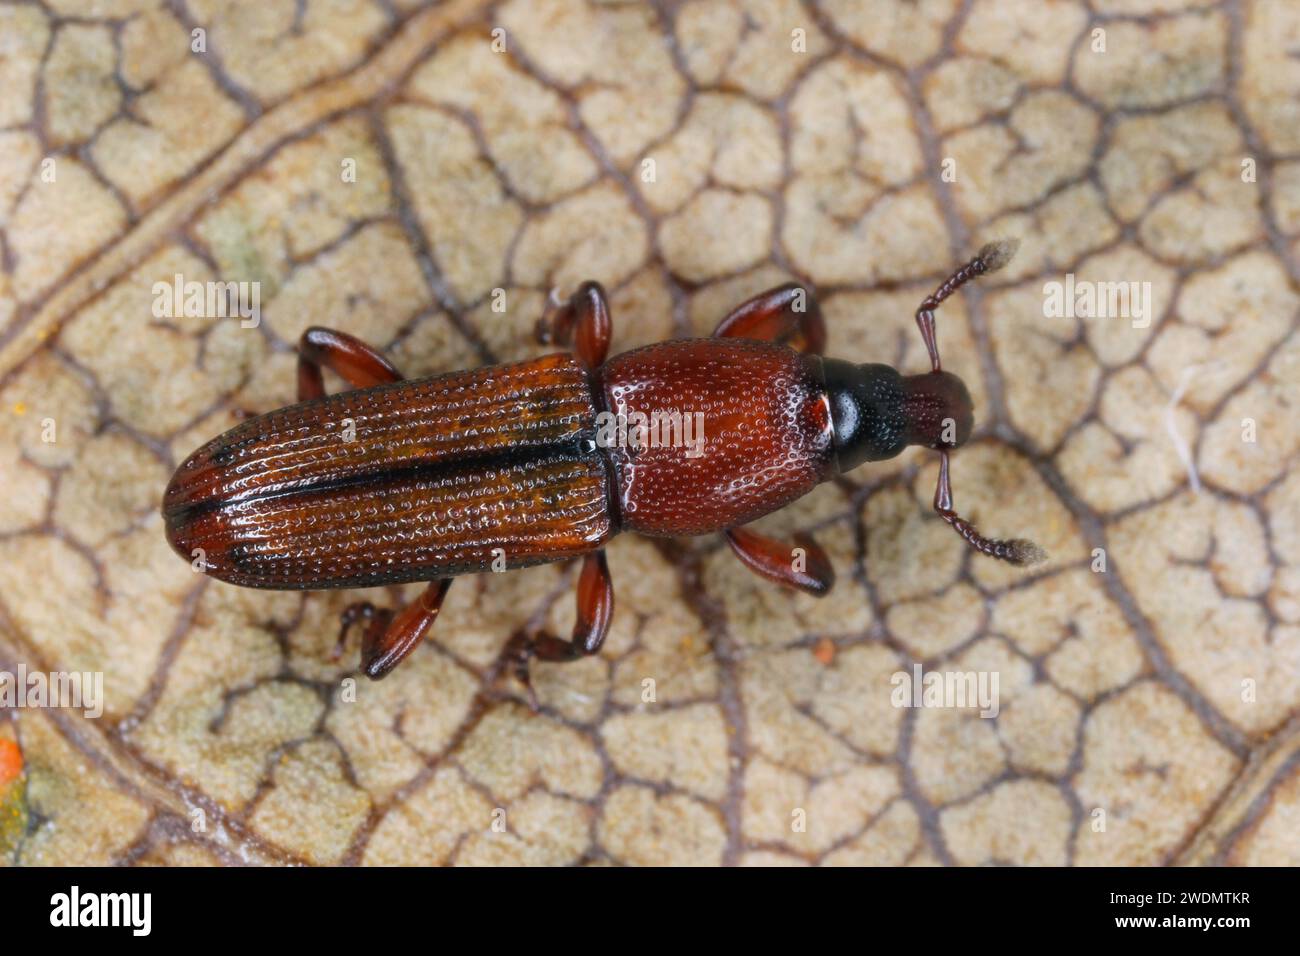 A beetle (snout beetles or true weevils, Curculionidae, Cossoninae)  observed under the bark of a tree on the island of Mauritius. Stock Photo